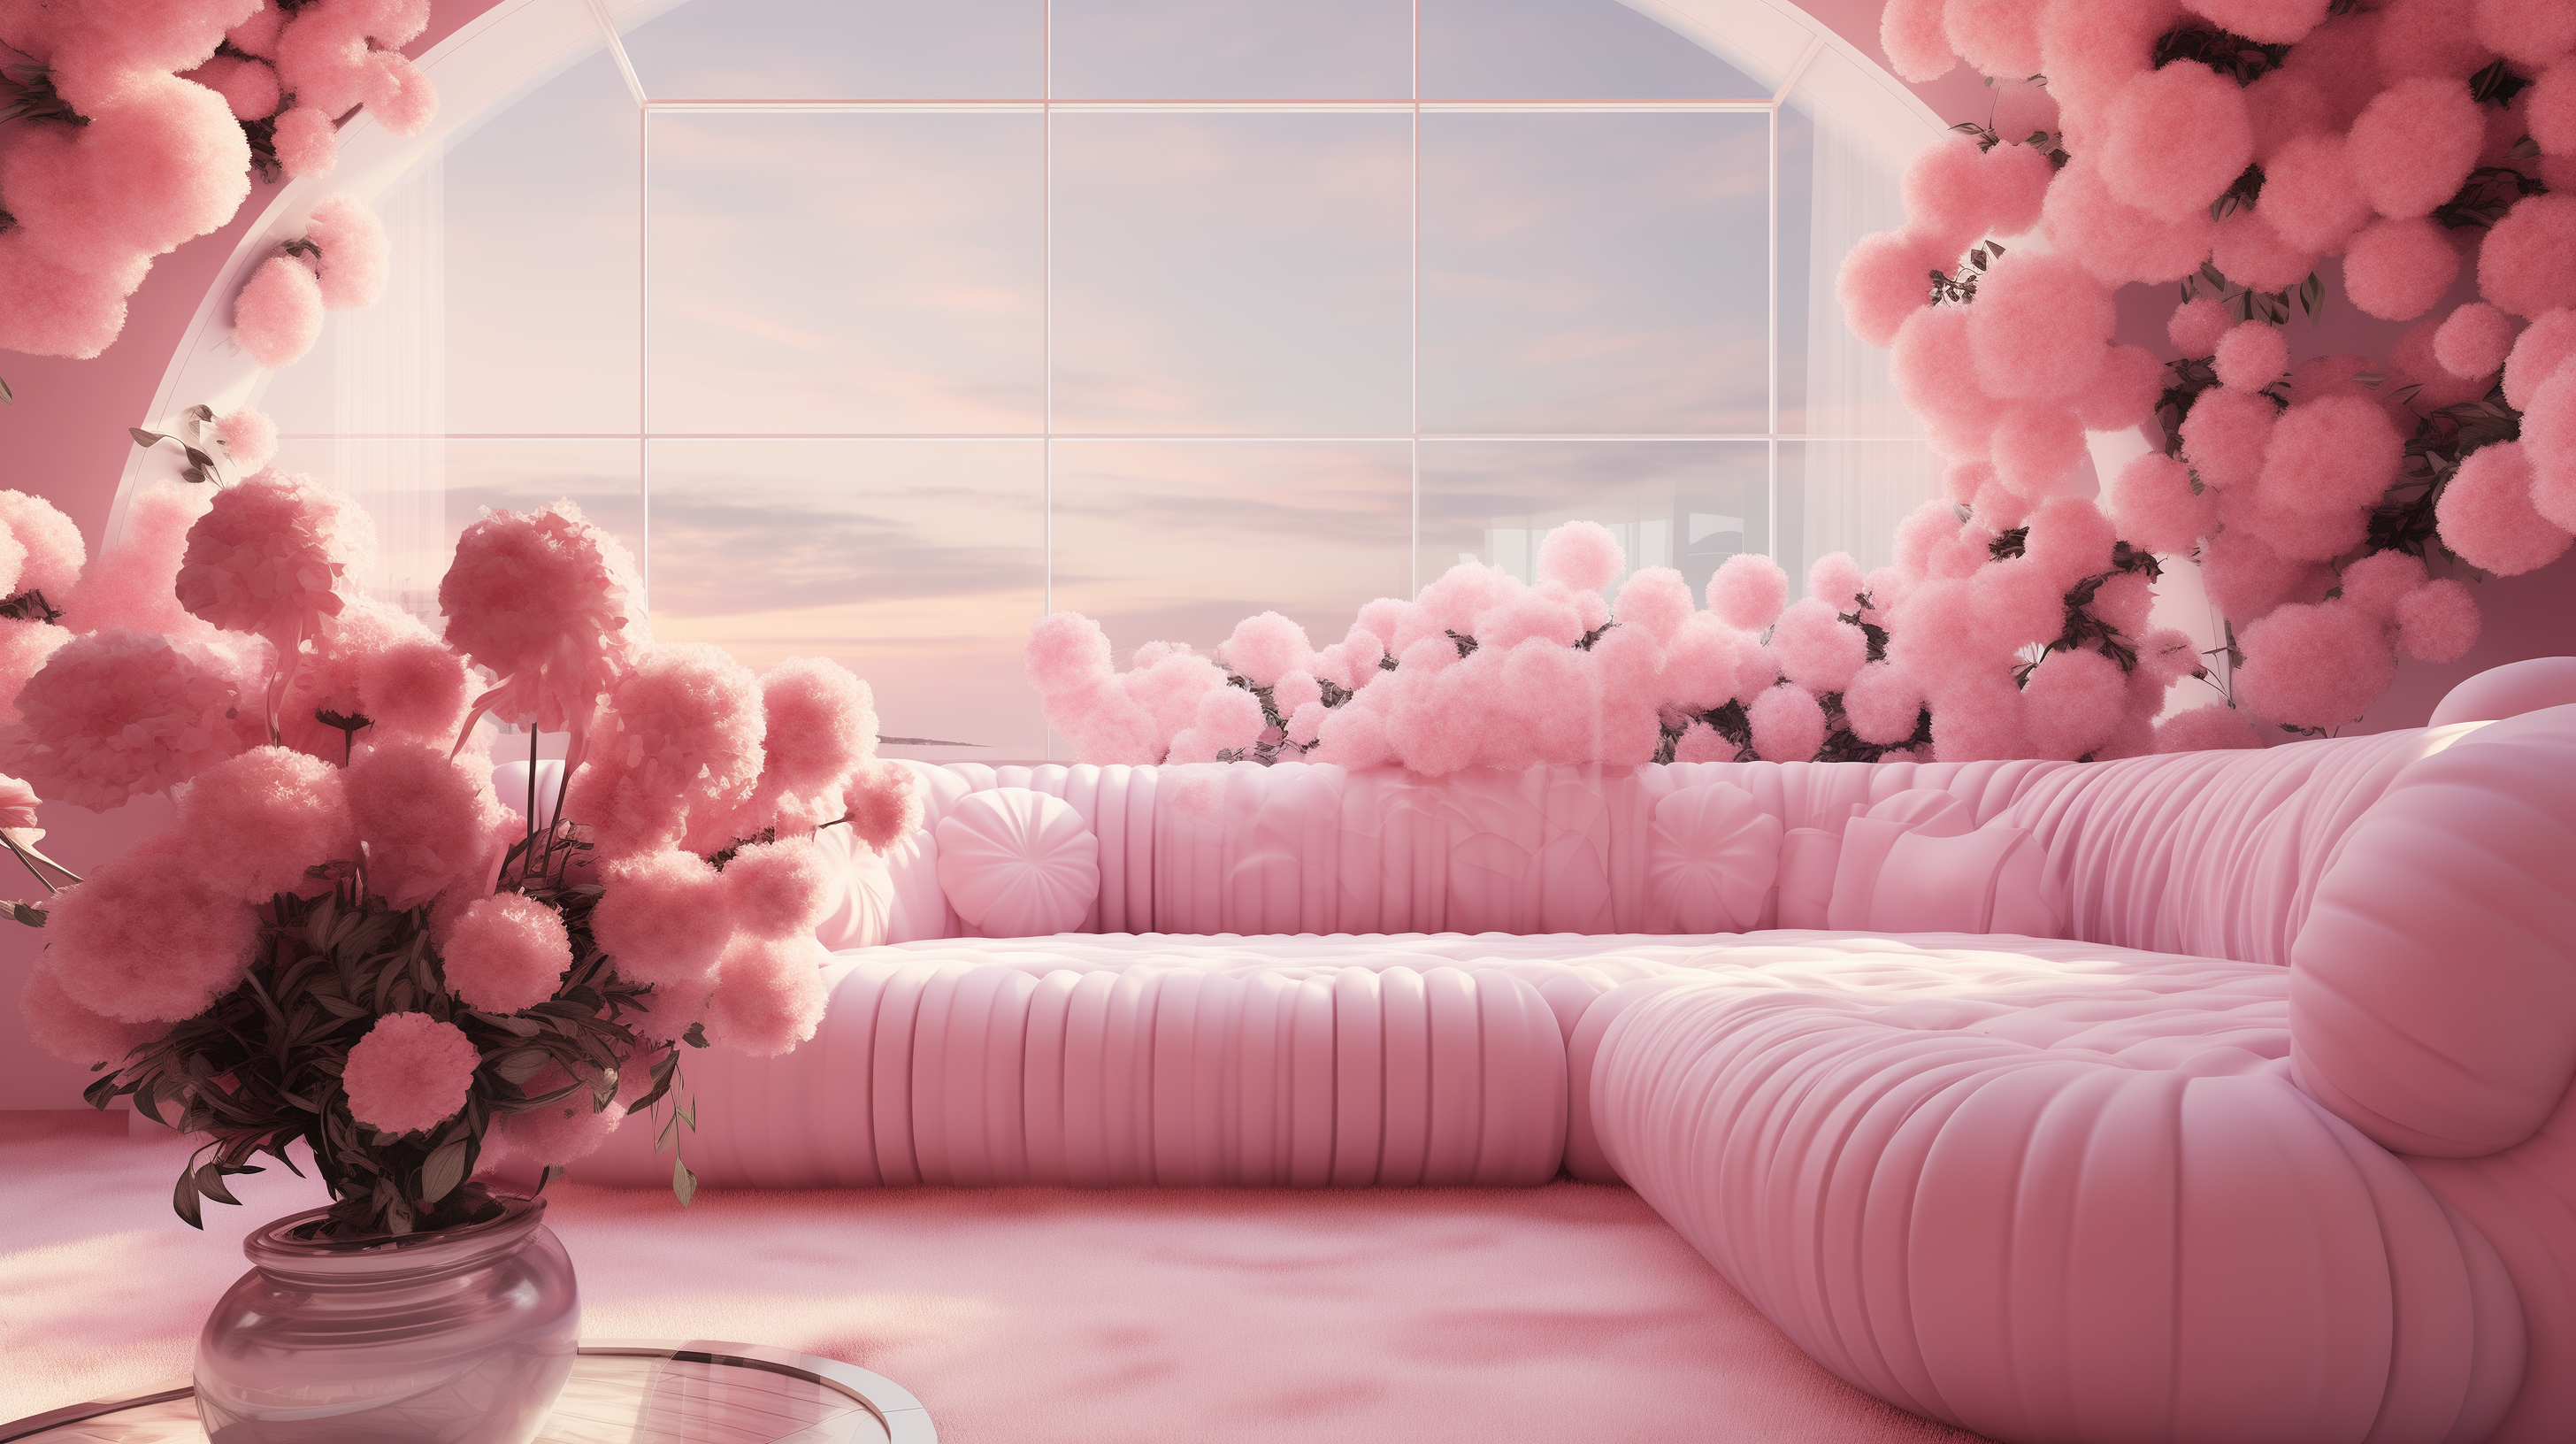 Pink Aesthetic Dreamy Room HD Wallpaper by robokoboto